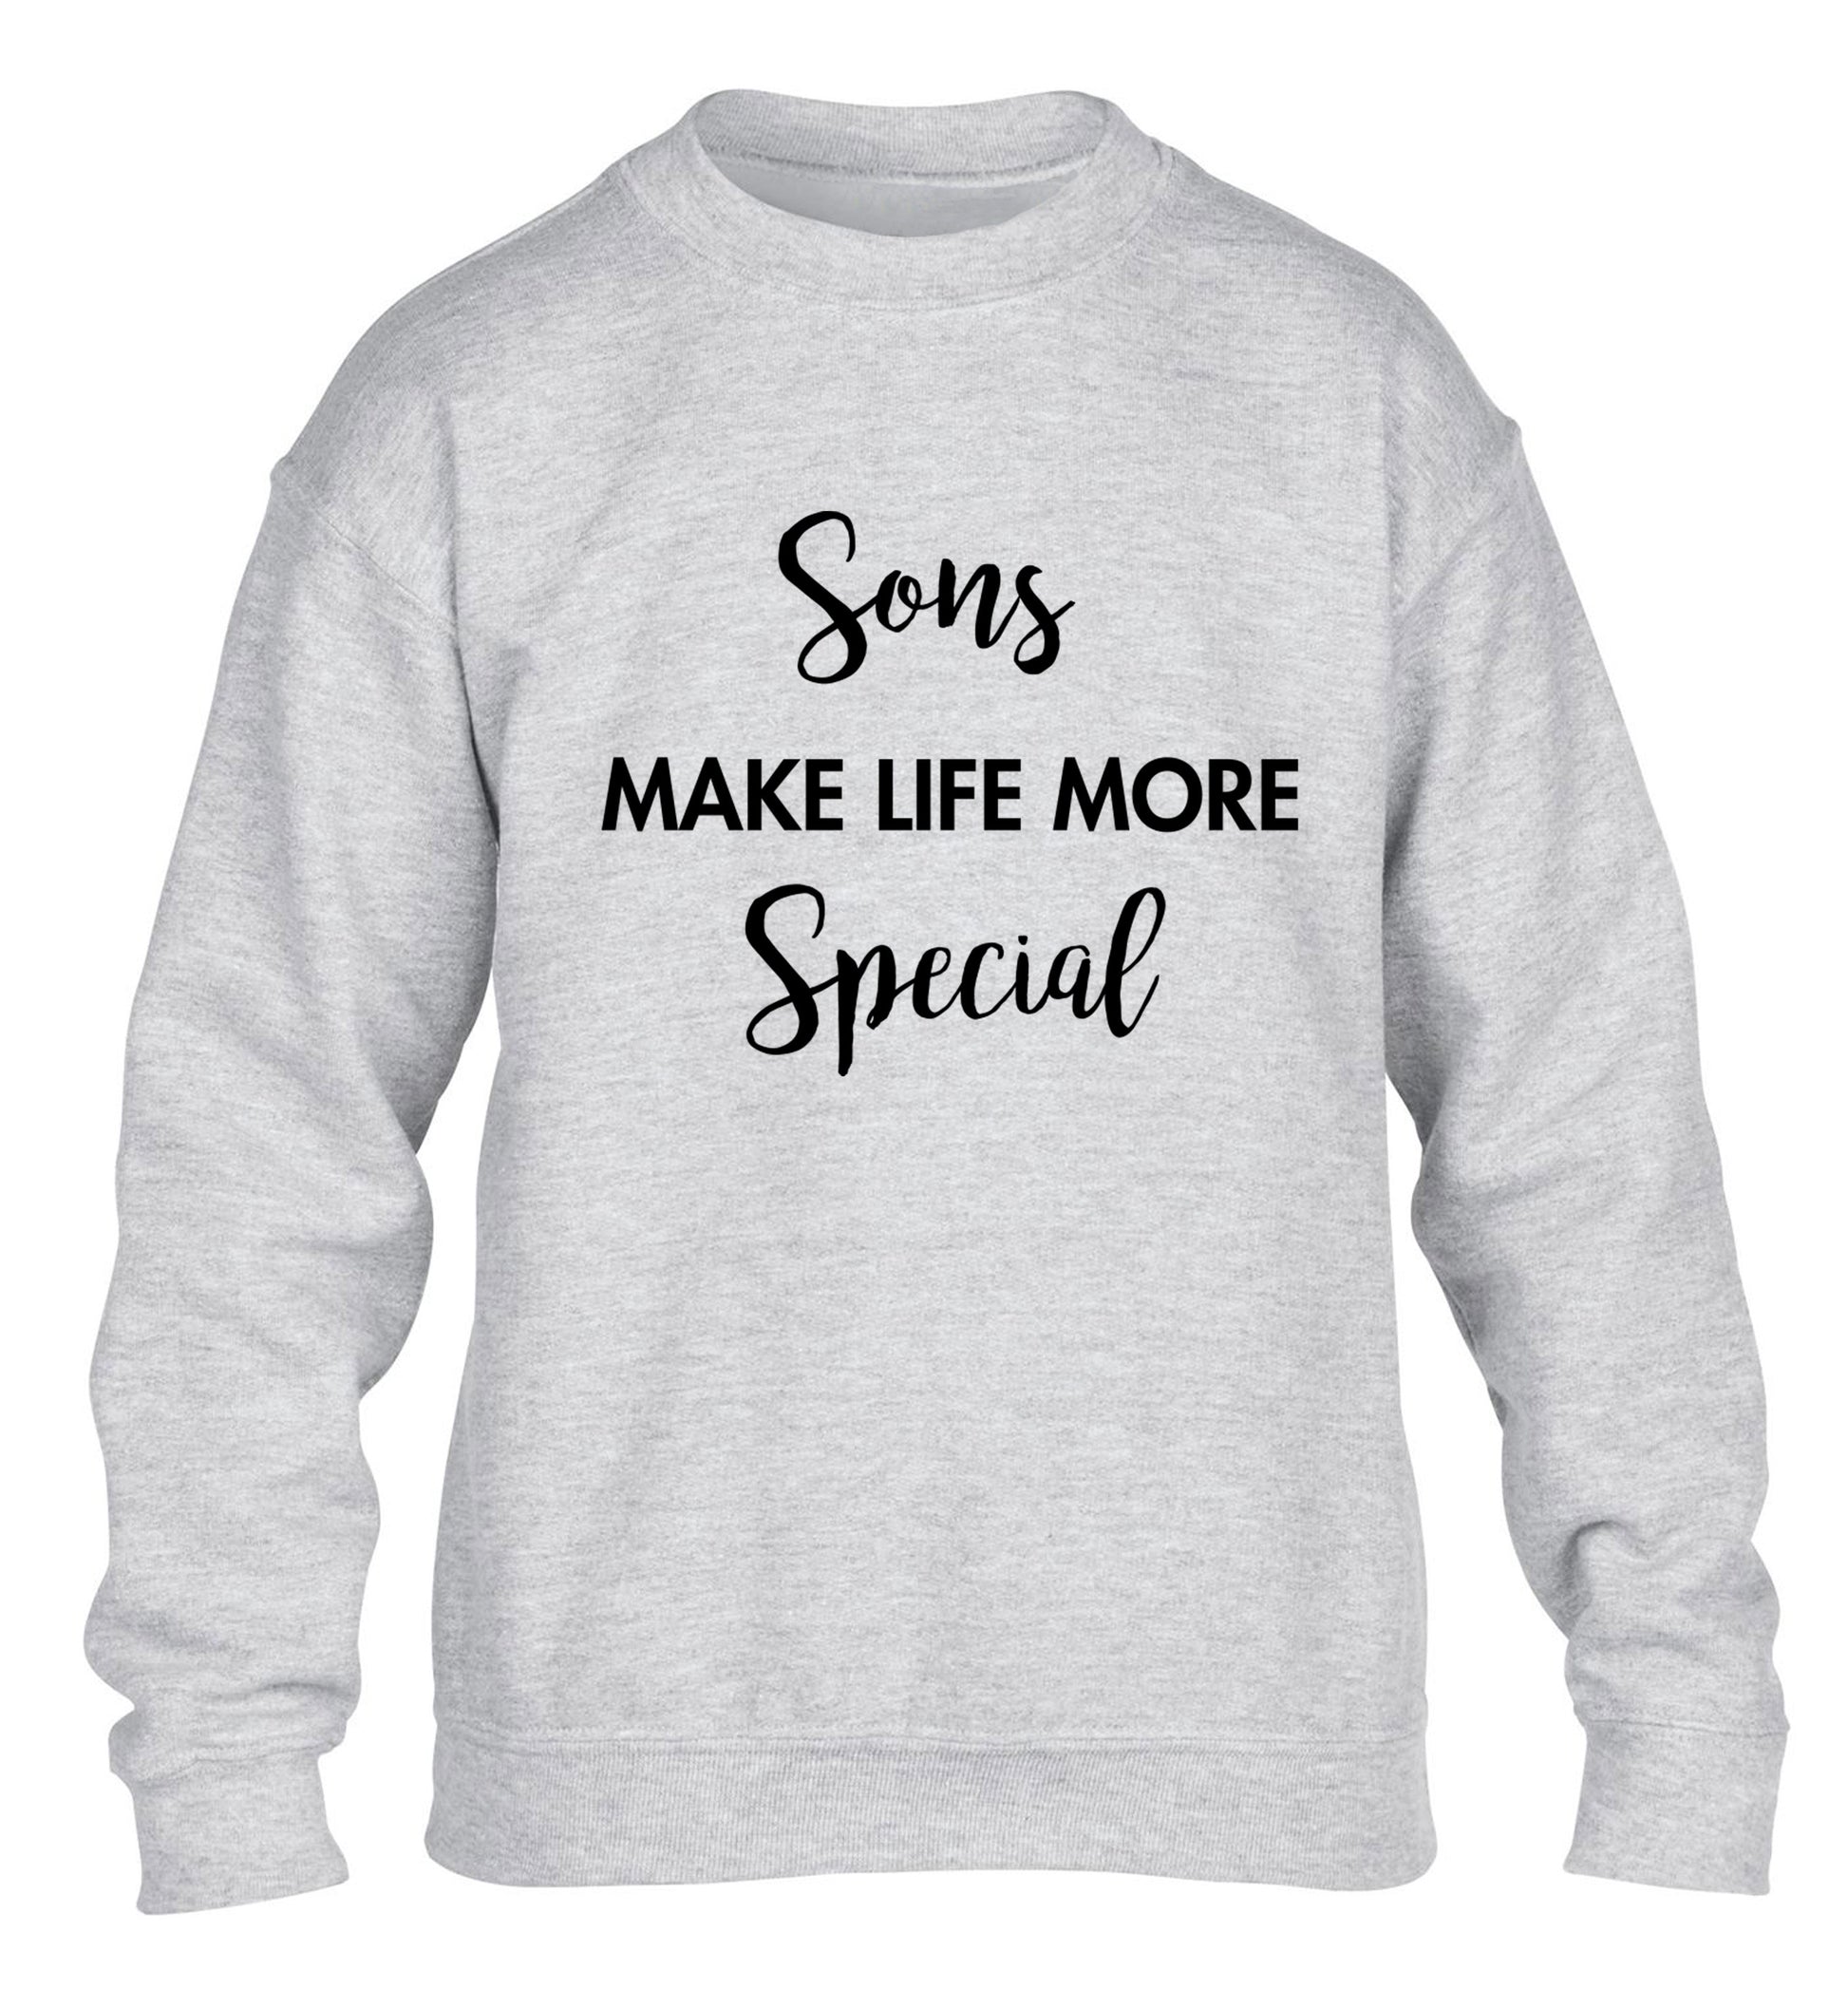 Daughters make life more special children's grey sweater 12-14 Years